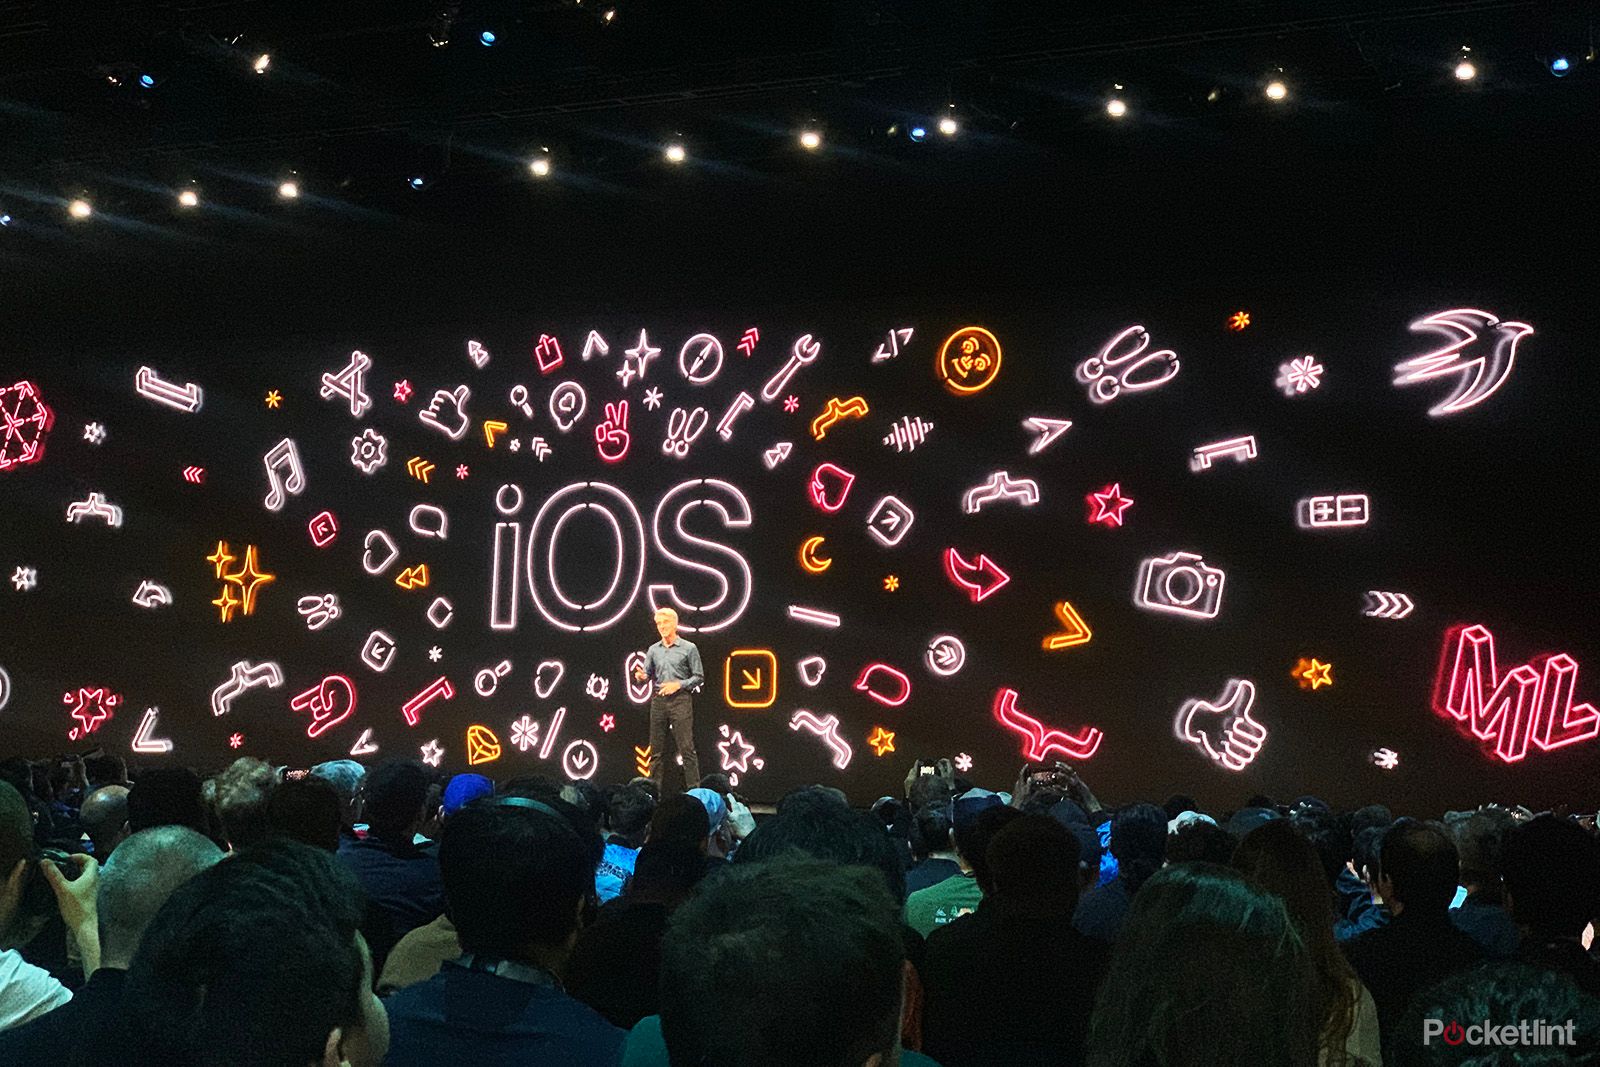 Apples Wwdc 2020 Plans Revealed With New Online Format image 1